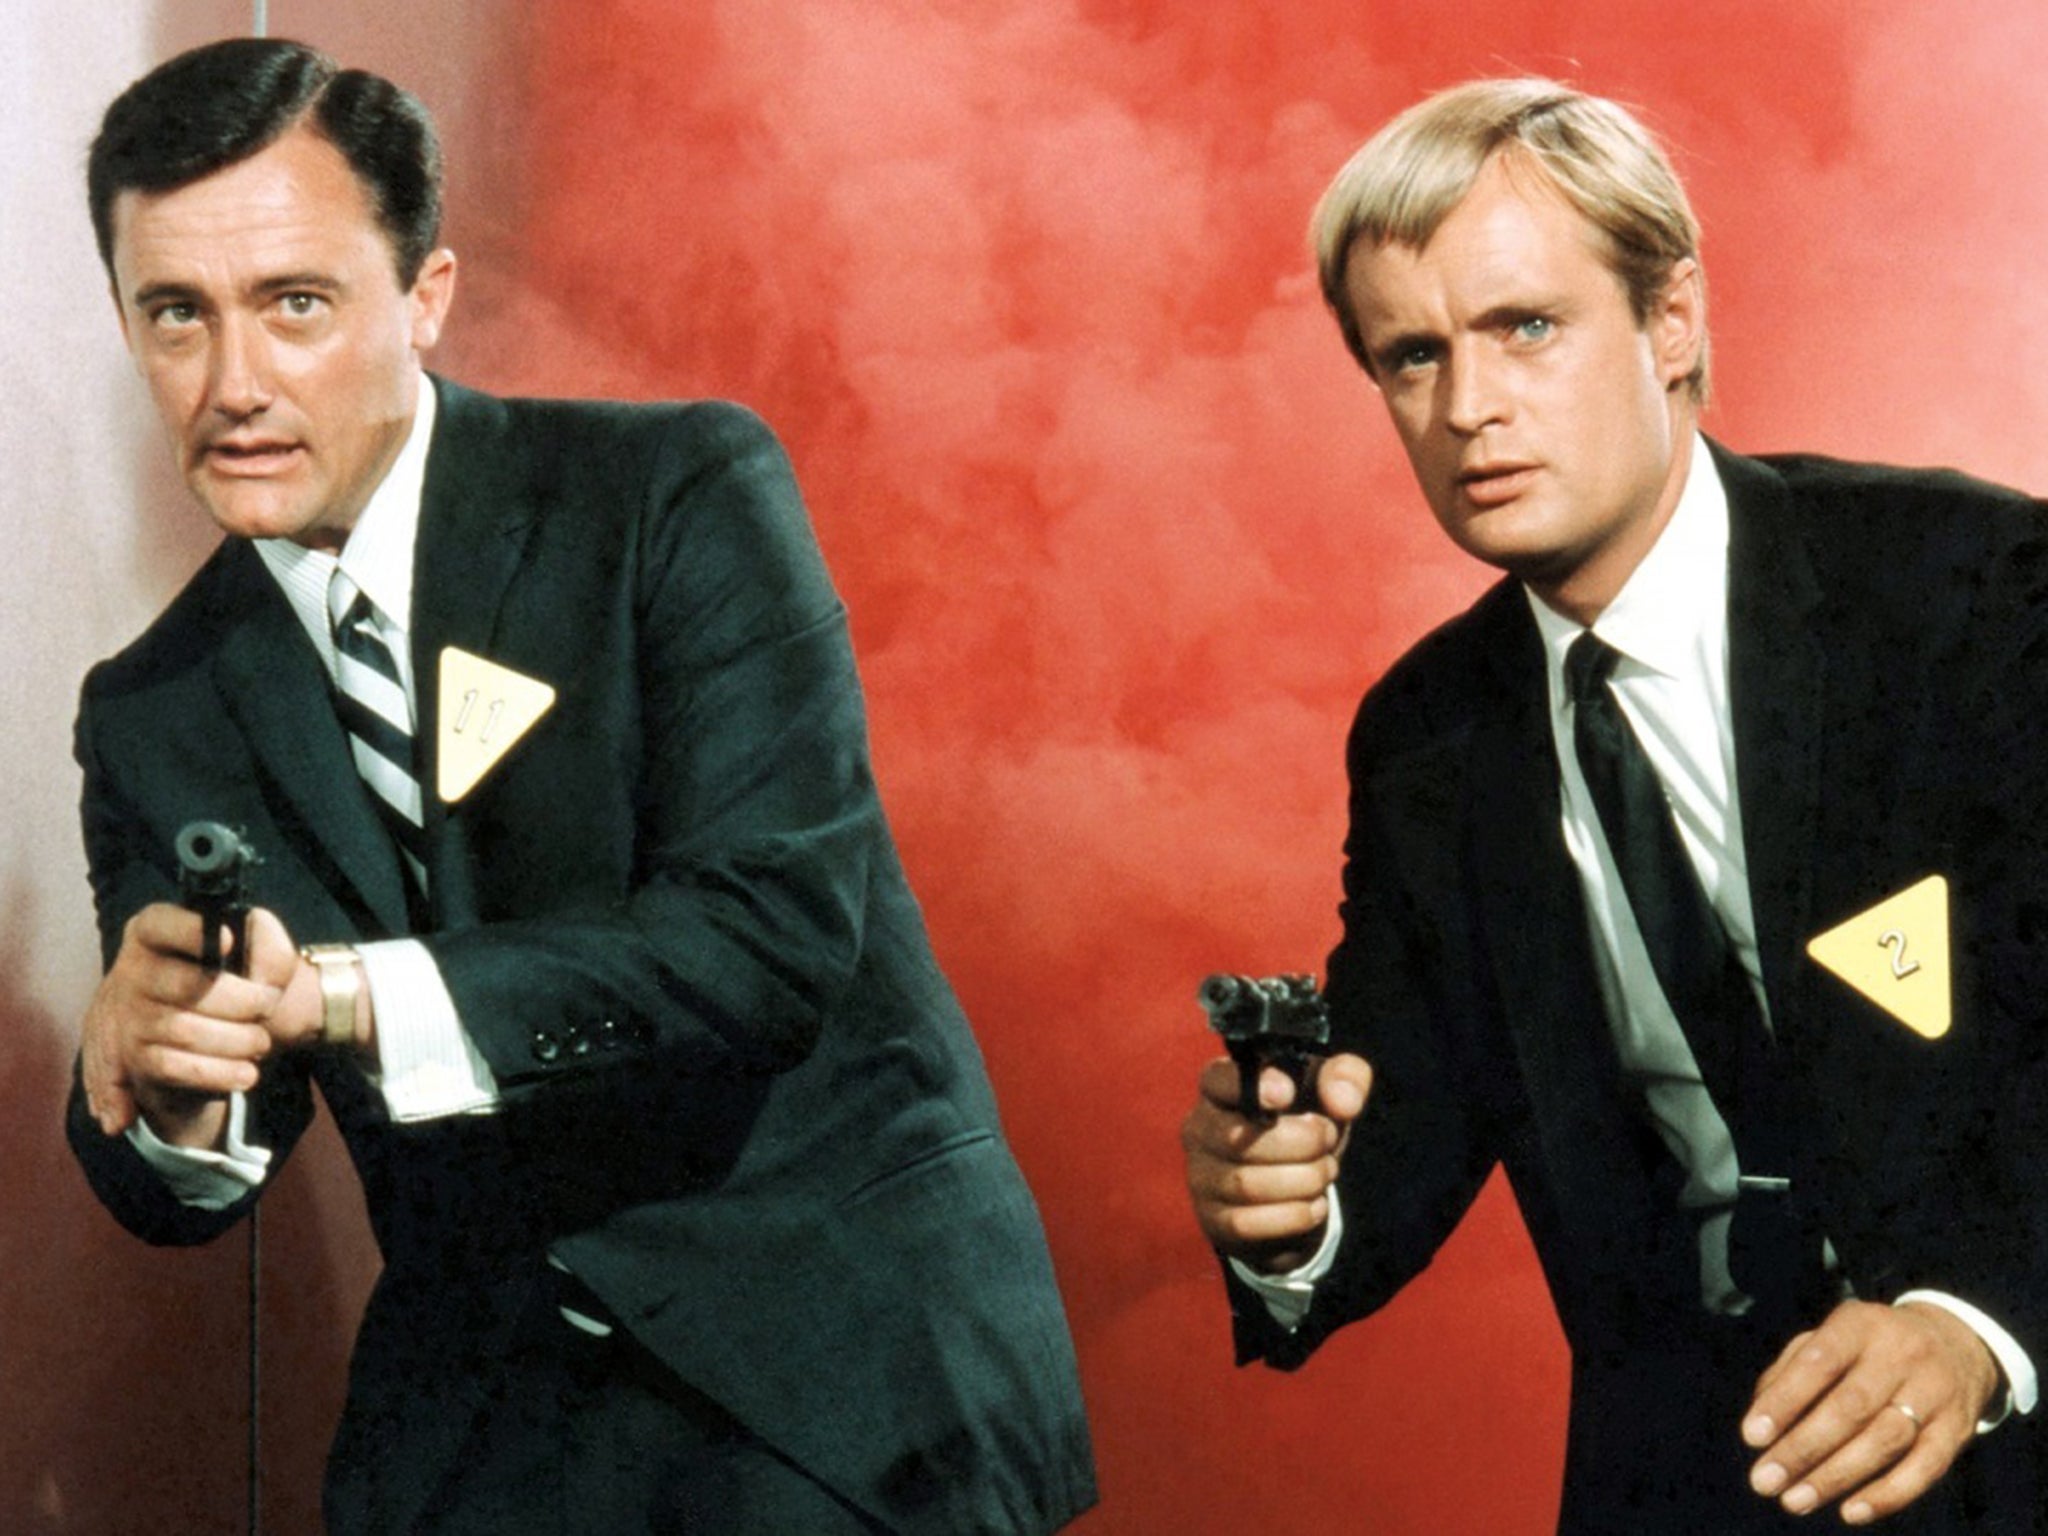 Robert Vaughn and David McCallum in the original TV series, which ran for 105 episodes between 1964 and 1968